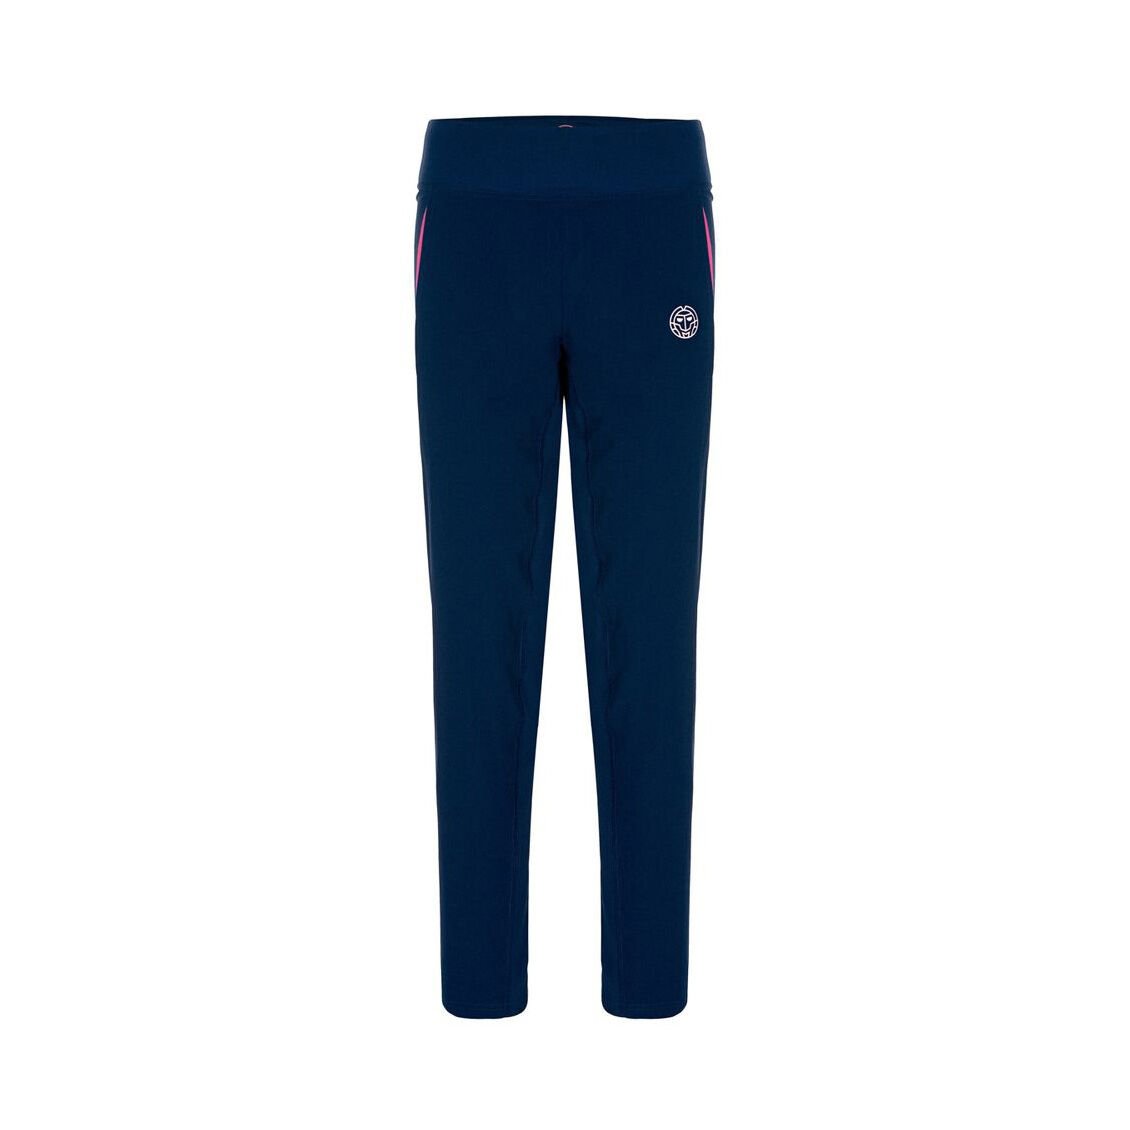 Tracksuit pants for women  Buy online  ABOUT YOU